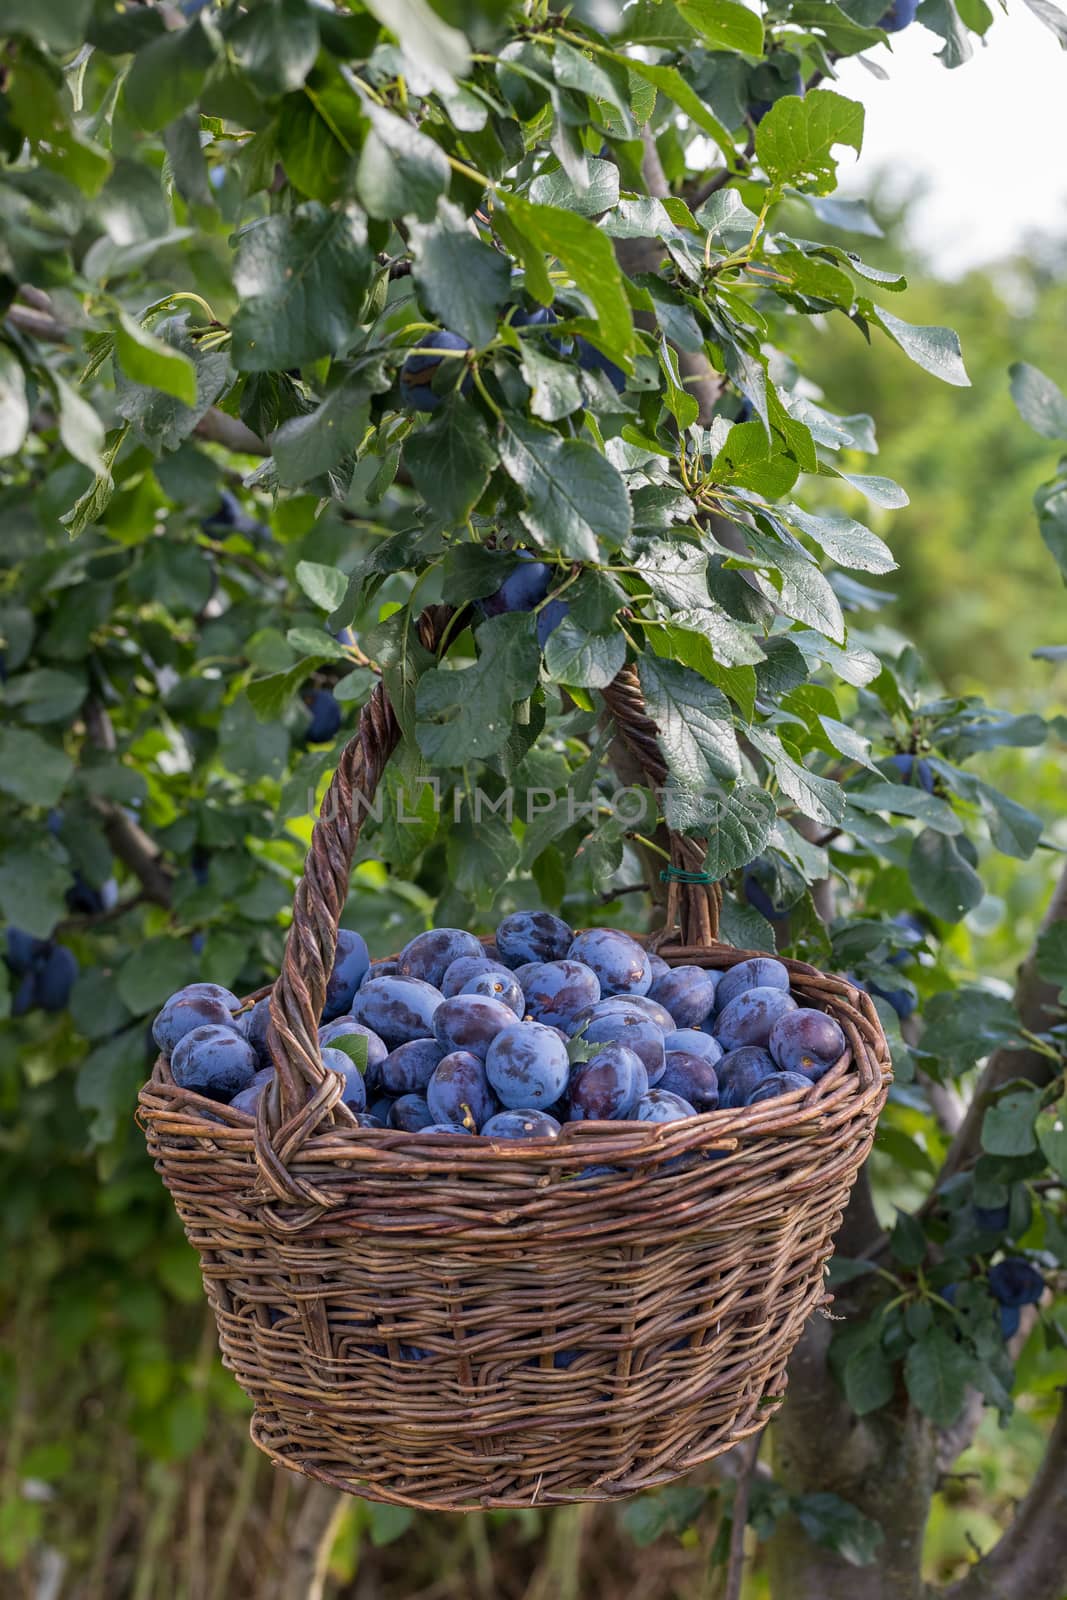 Plum harvest. Freshly torn plums in the basket on the green grass. Europe, Czech republic